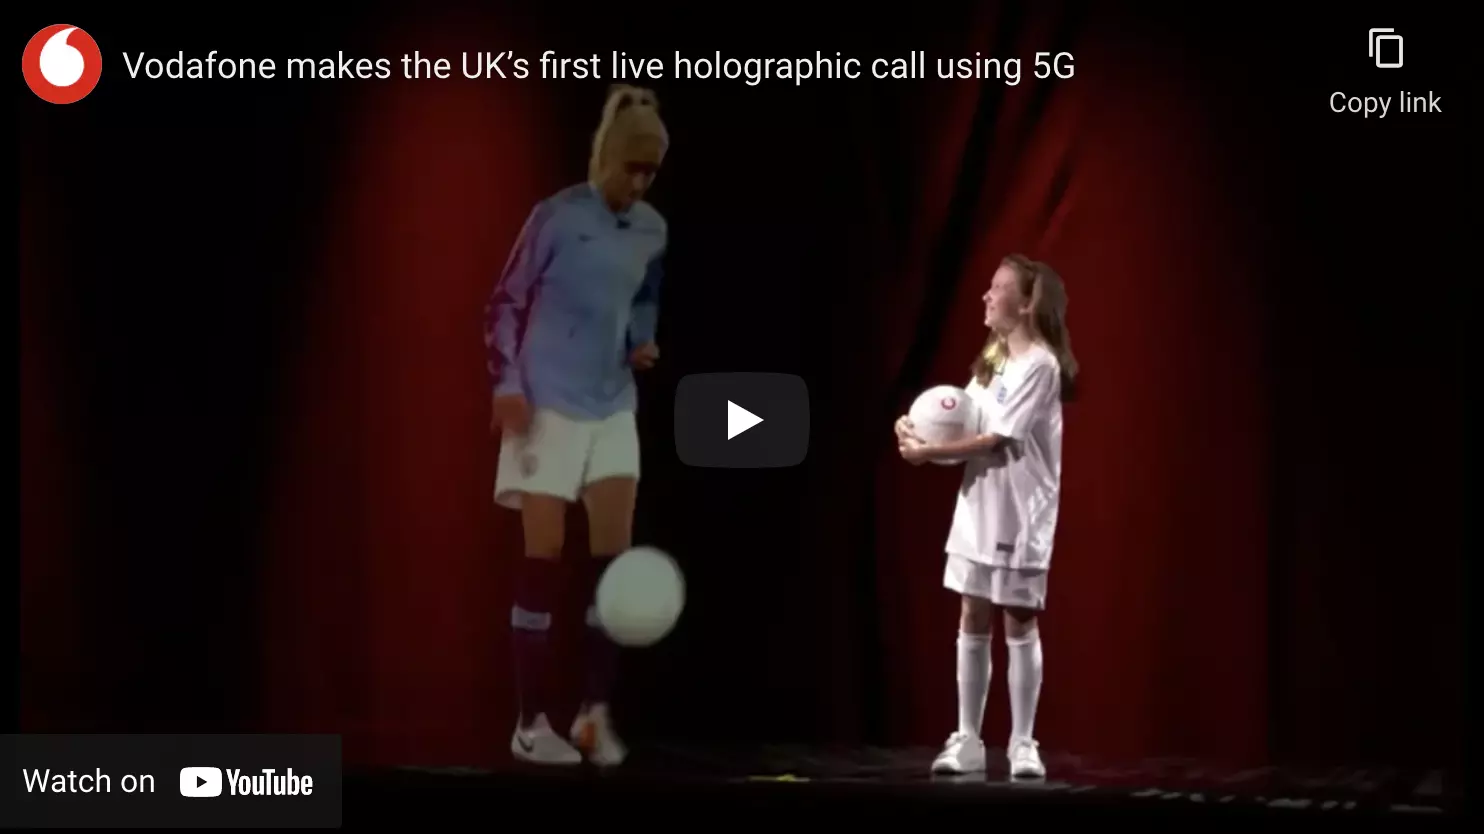 Vodafone_makes_the_UKs_first_live_holographic_call_using_5G.png